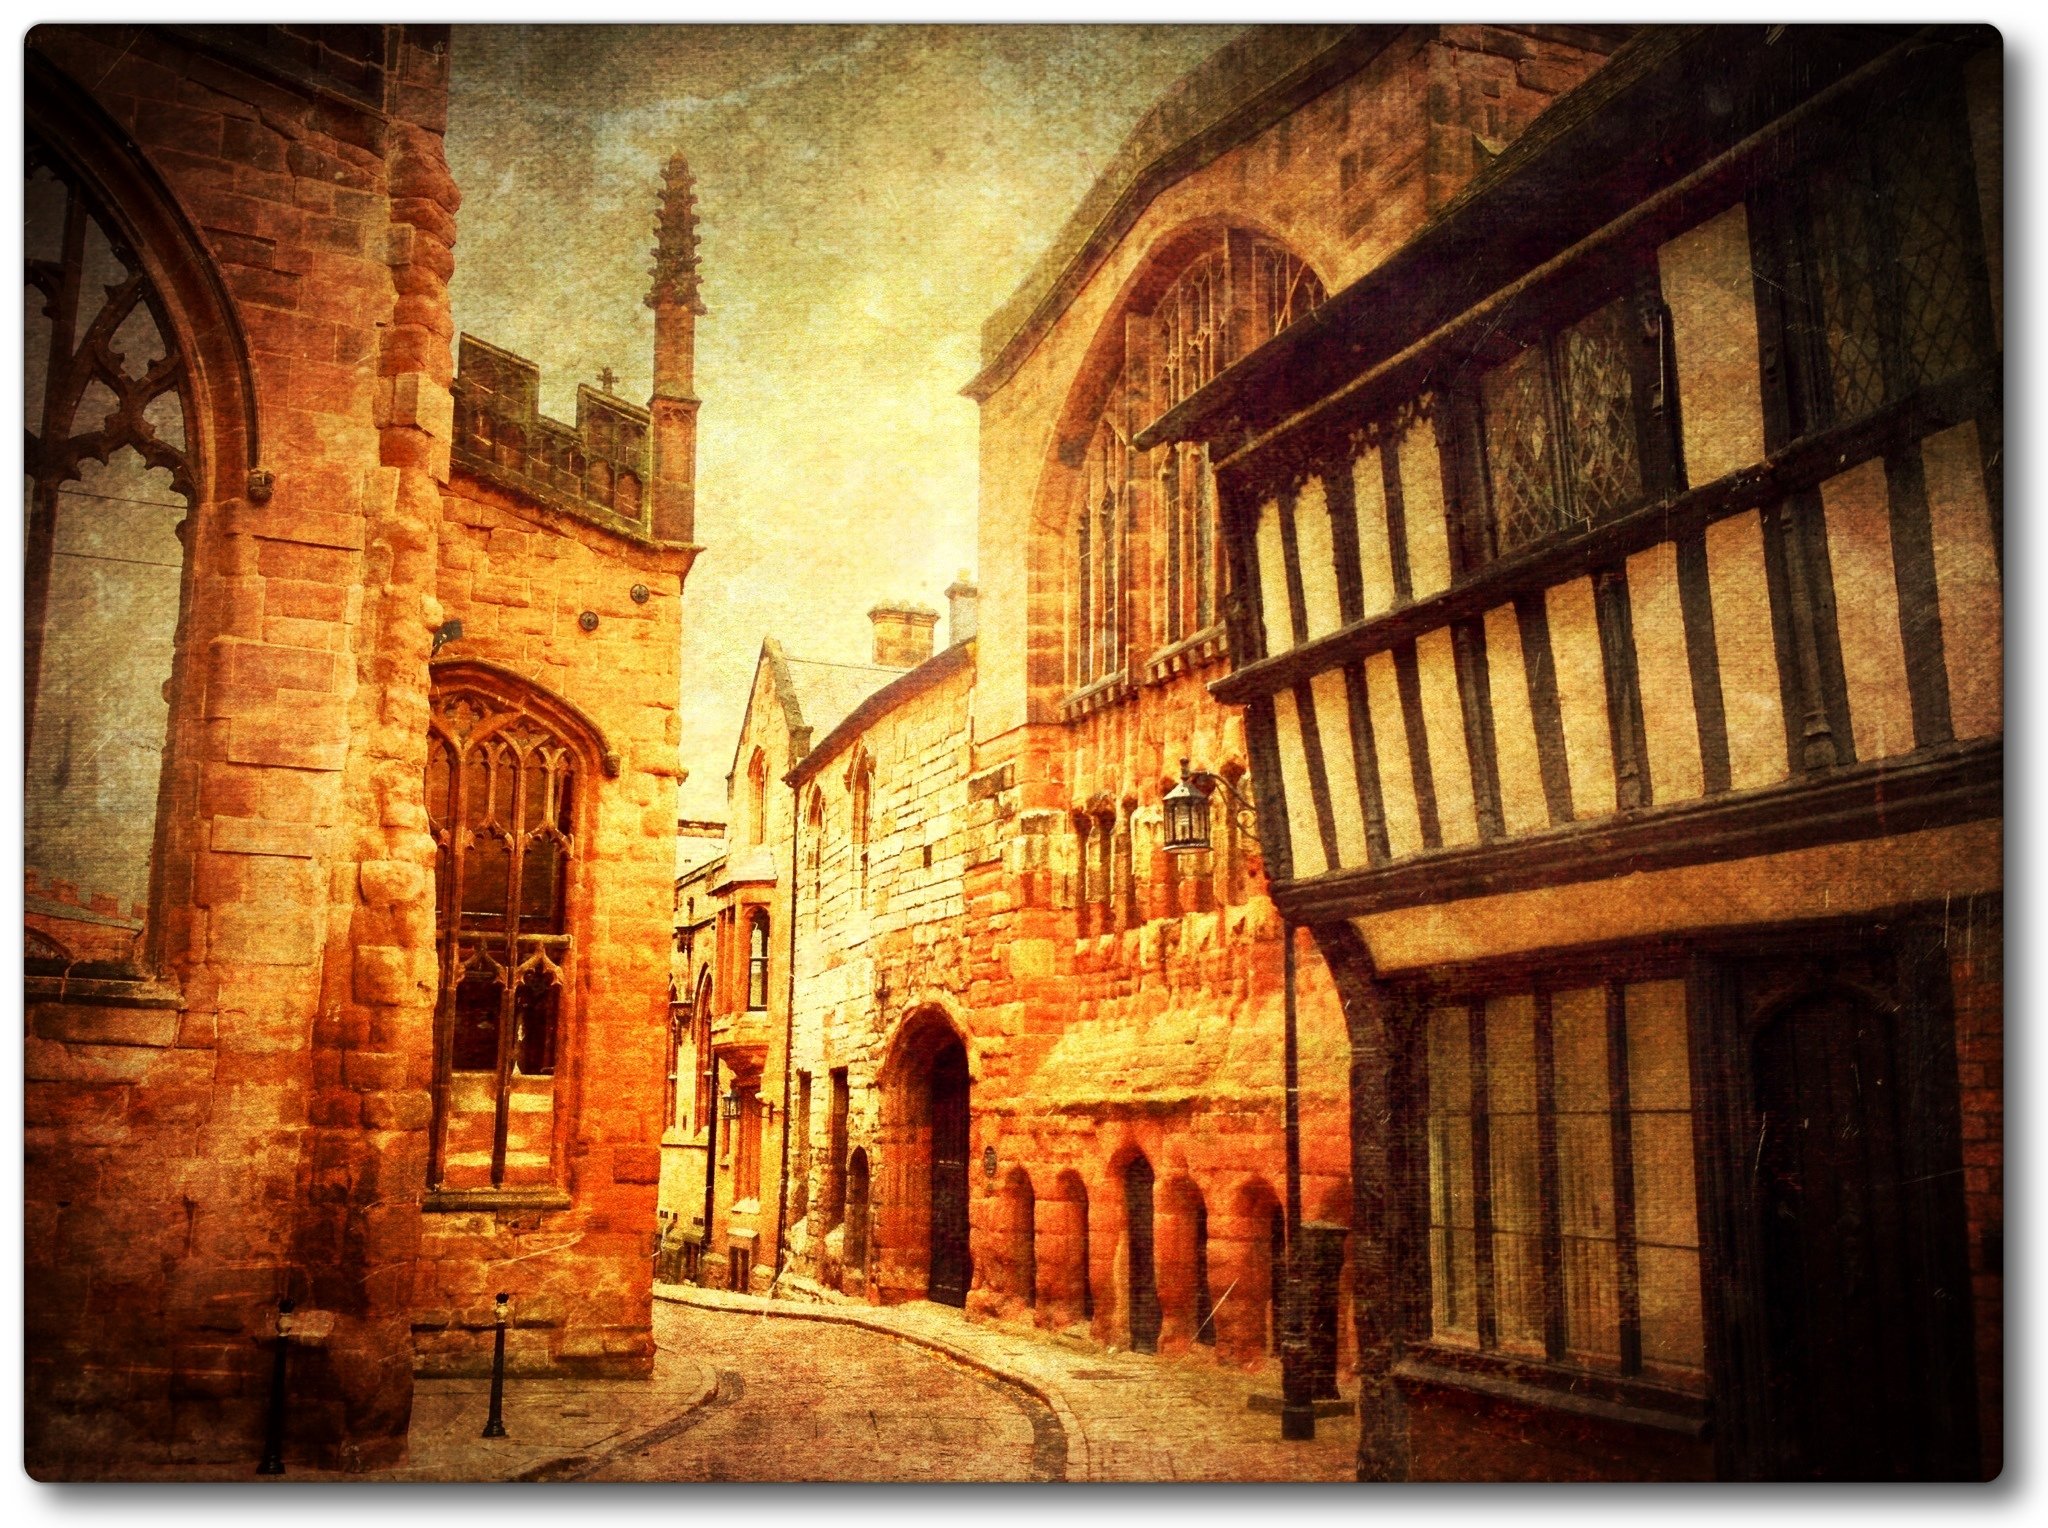 Wallpaper, cathedral, coventry, iPhone, listedbuilding, iphone iphoneart, iphone iphoneography, iphoneonly, phototoaster, mextures, distressedfx, vividhdr 2048x1528